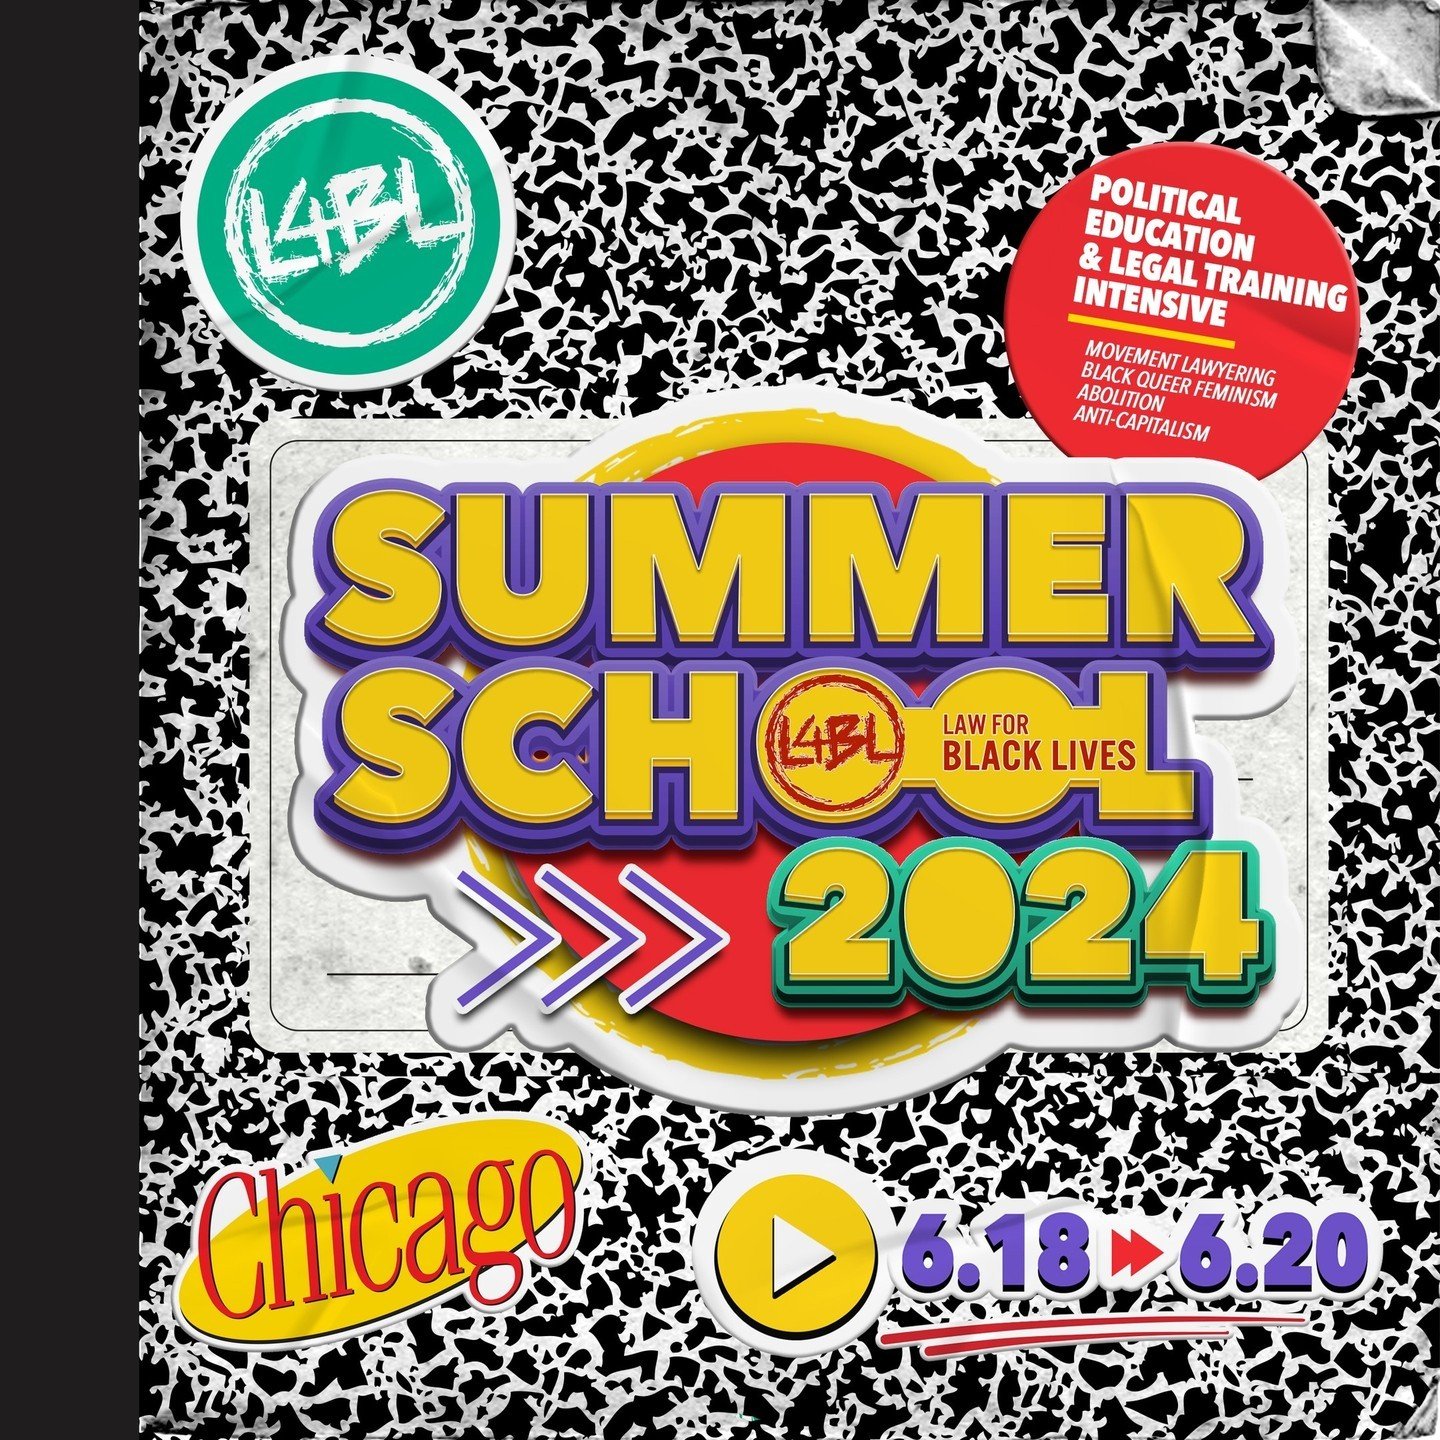 Are you a legal worker, law student, or lawyer interested in deepening your political analysis while learning how to use your legal toolkit to support organizers during an election season? Apply for L4BL&rsquo;s Summer School!⁠
⁠
Summer School provid